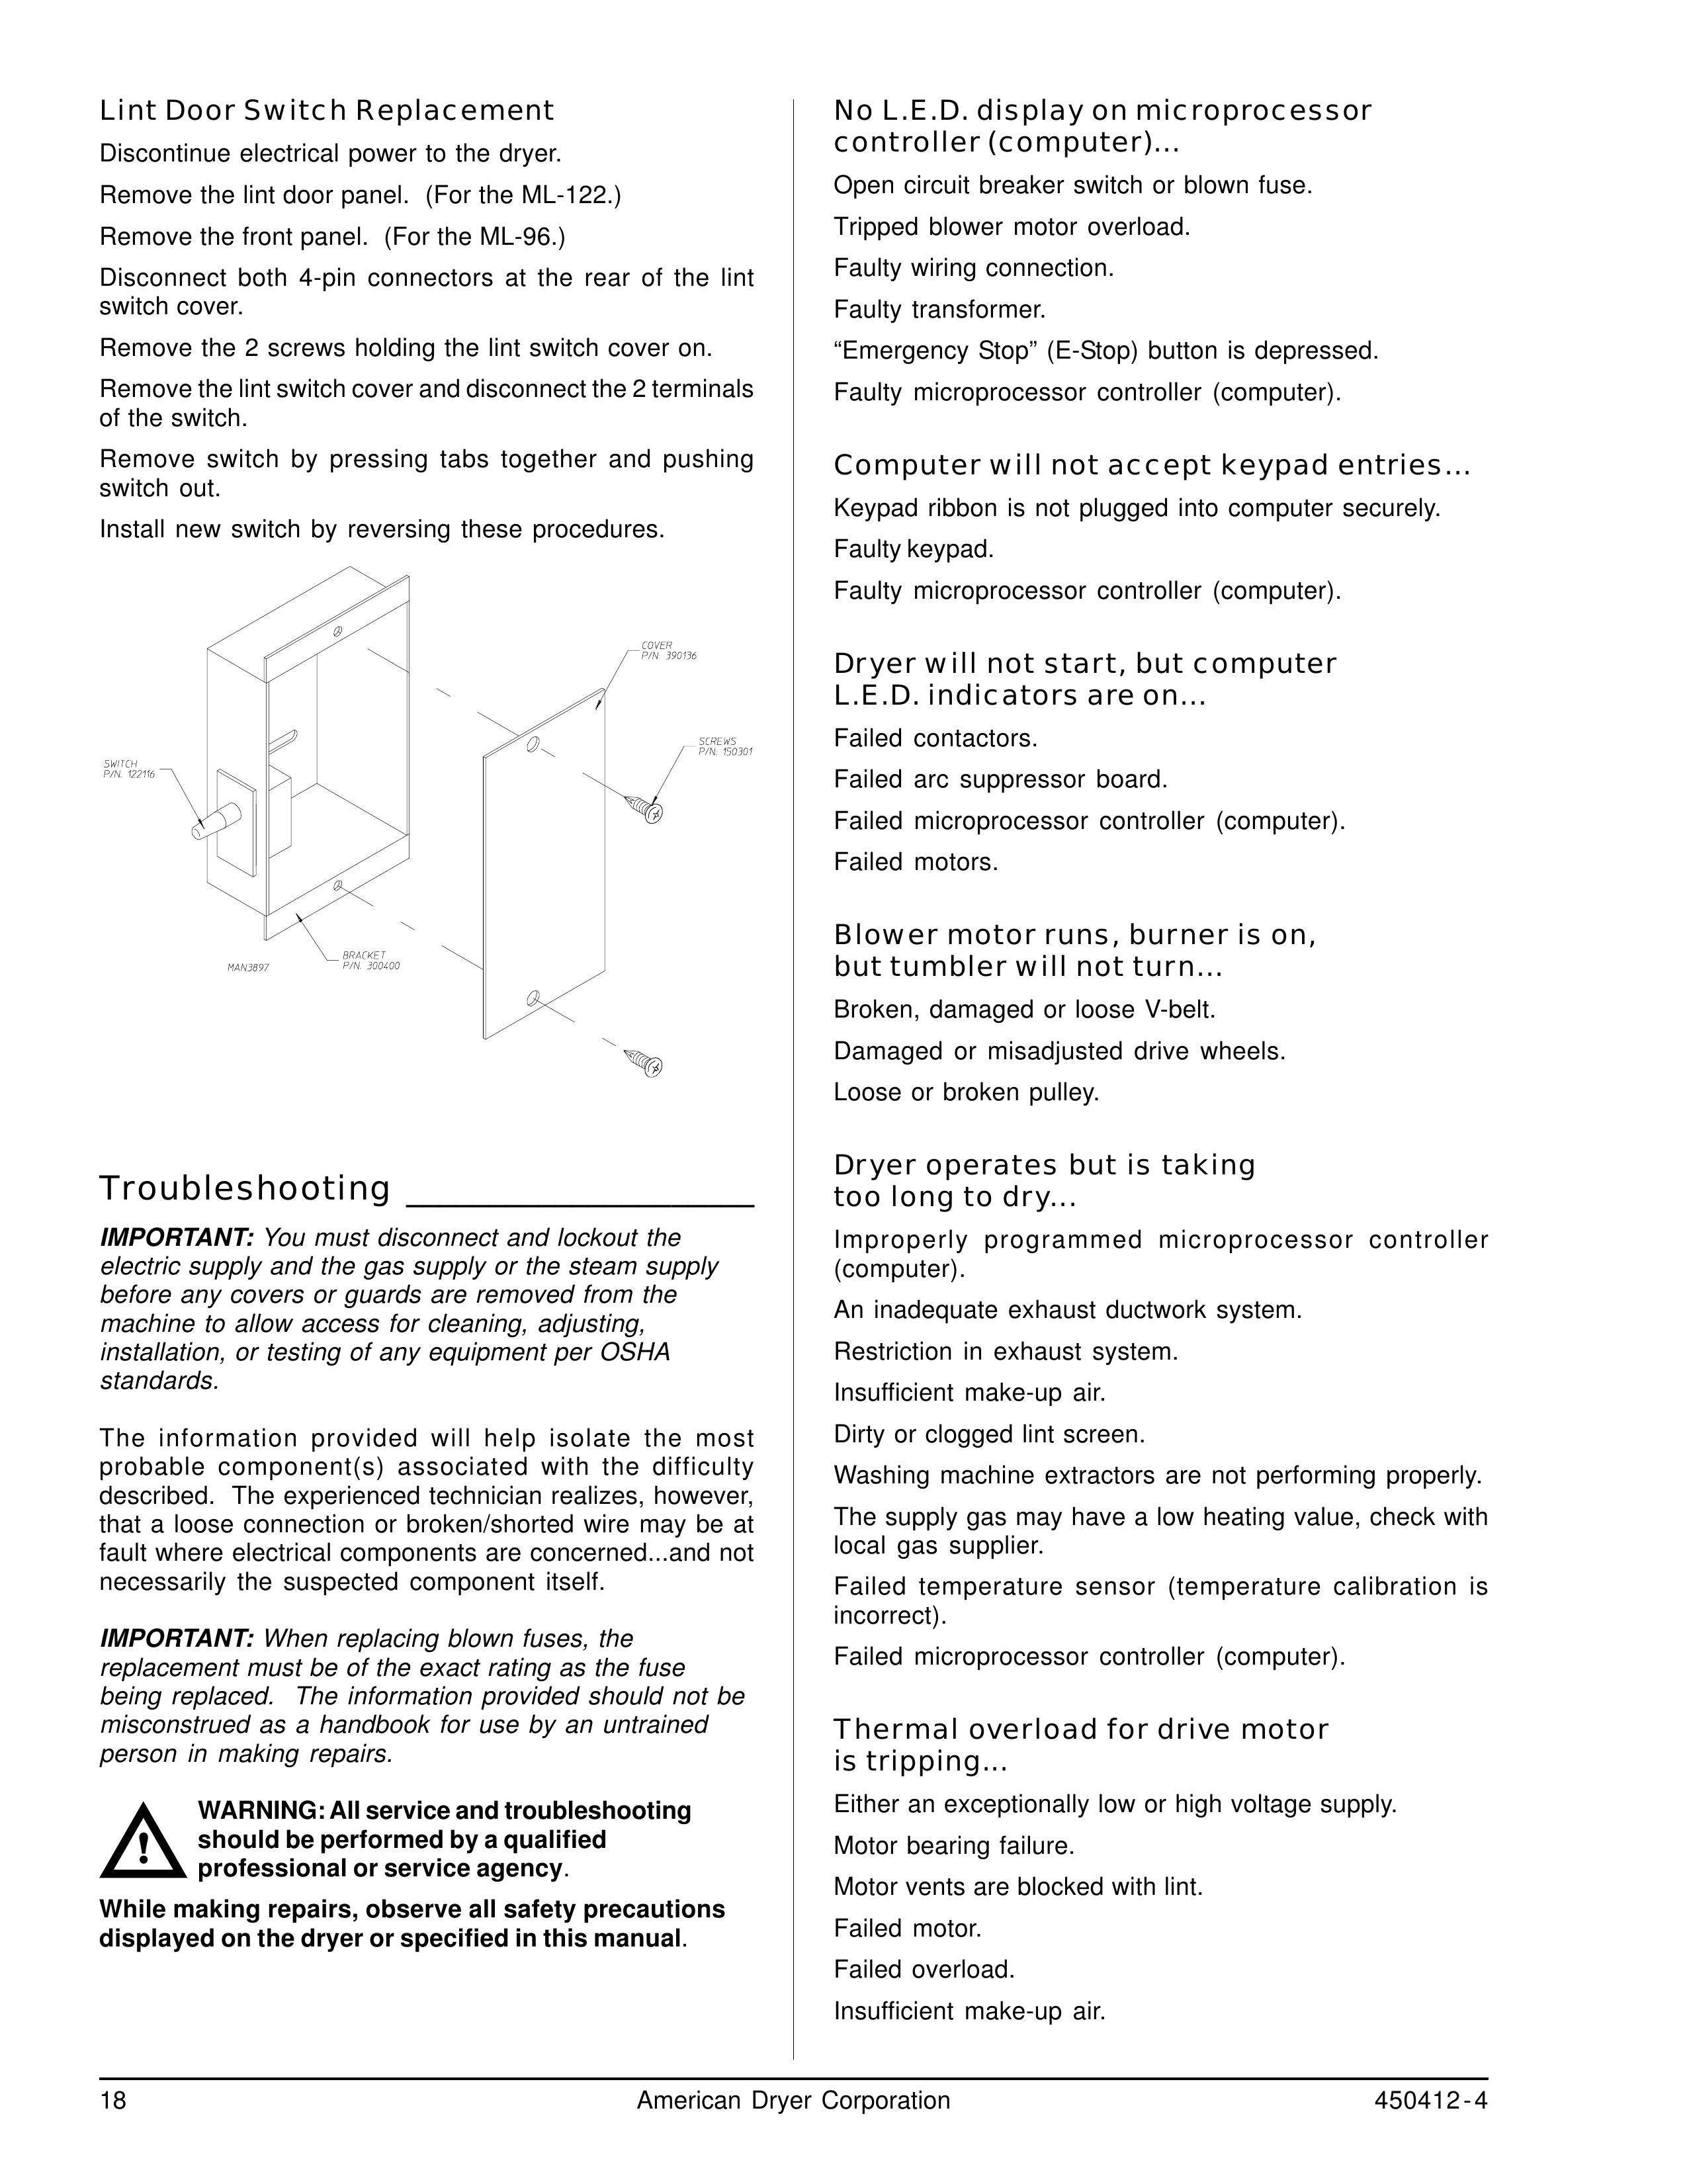 ADC ML-122 Clothes Dryer User Manual (Page 18)